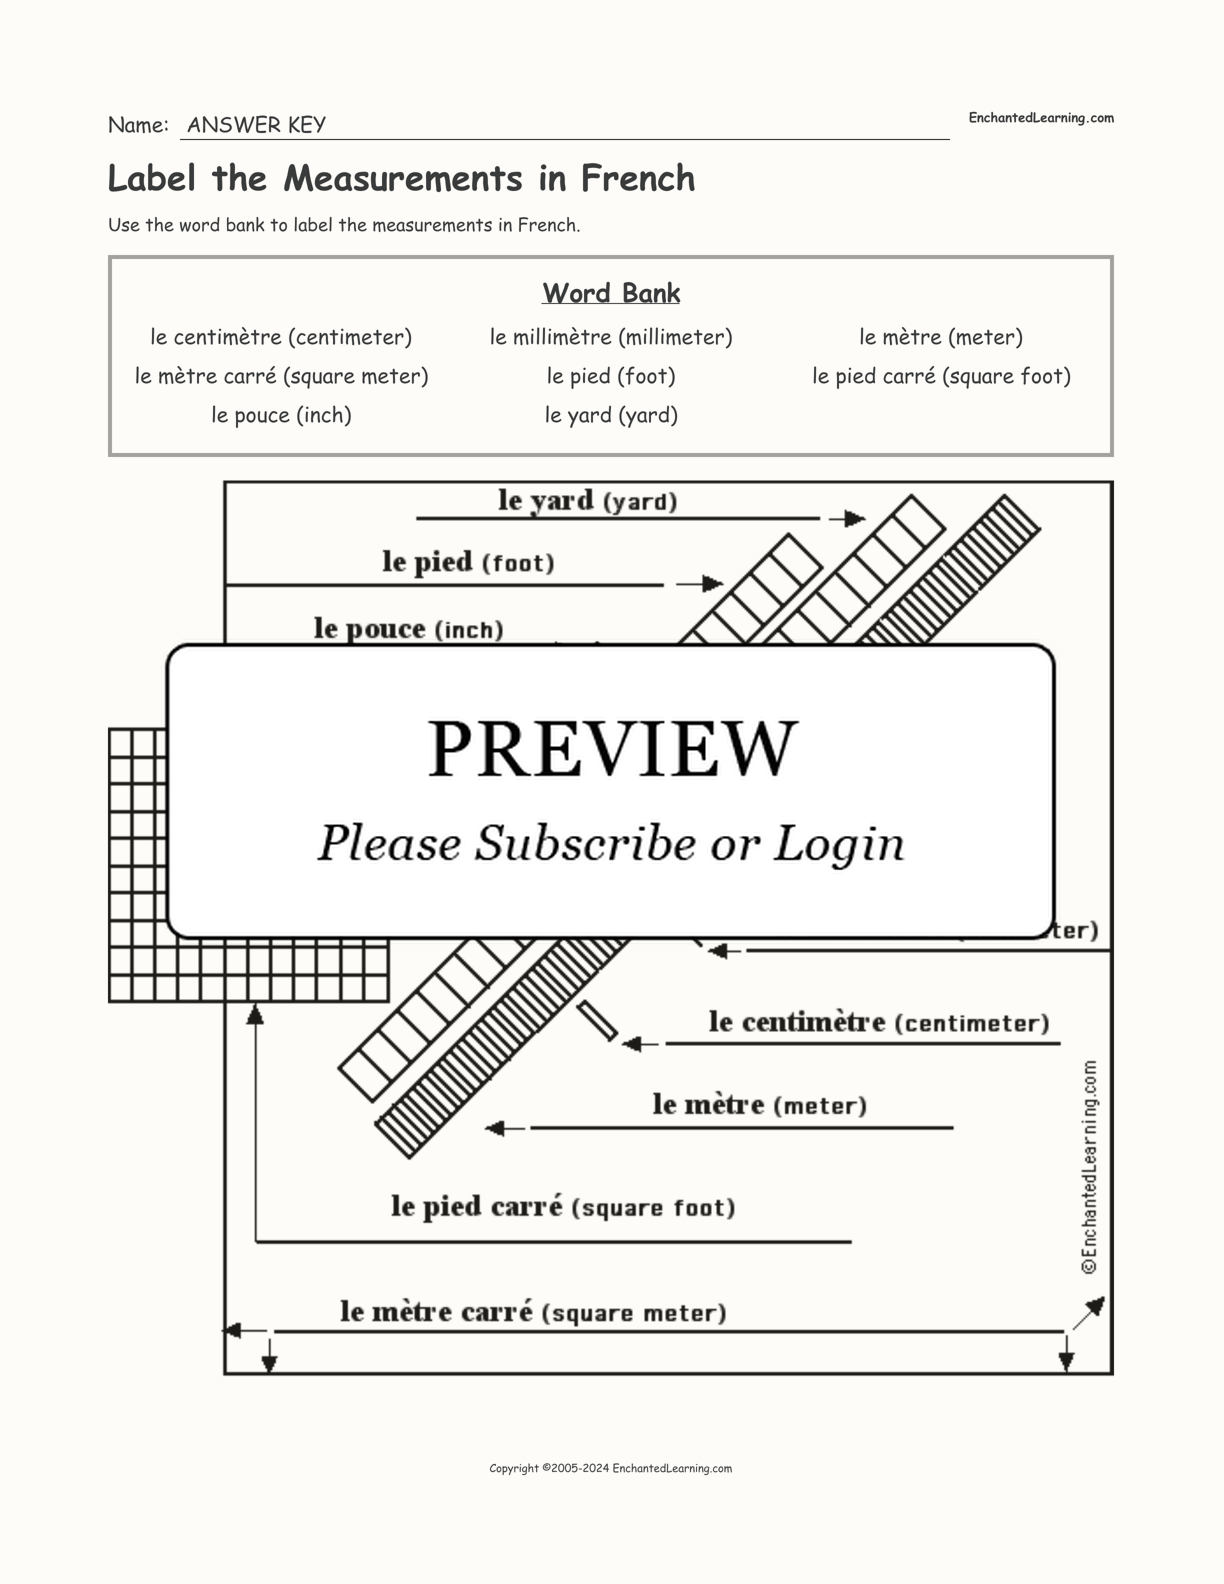 Label the Measurements in French interactive worksheet page 2